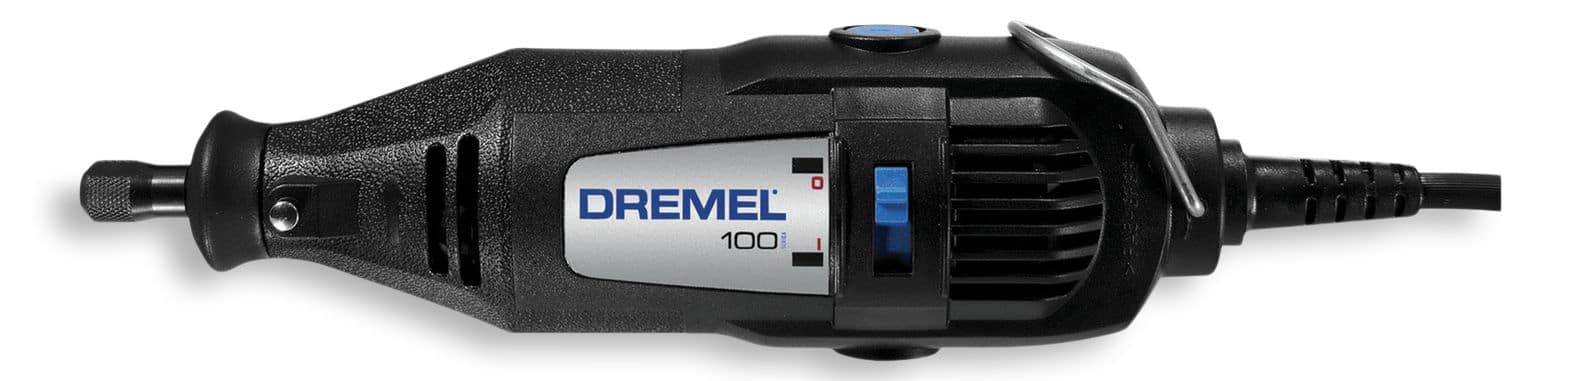 Dremel 100-N/7 0.9A Single Speed Rotary Tool Kit with Assorted